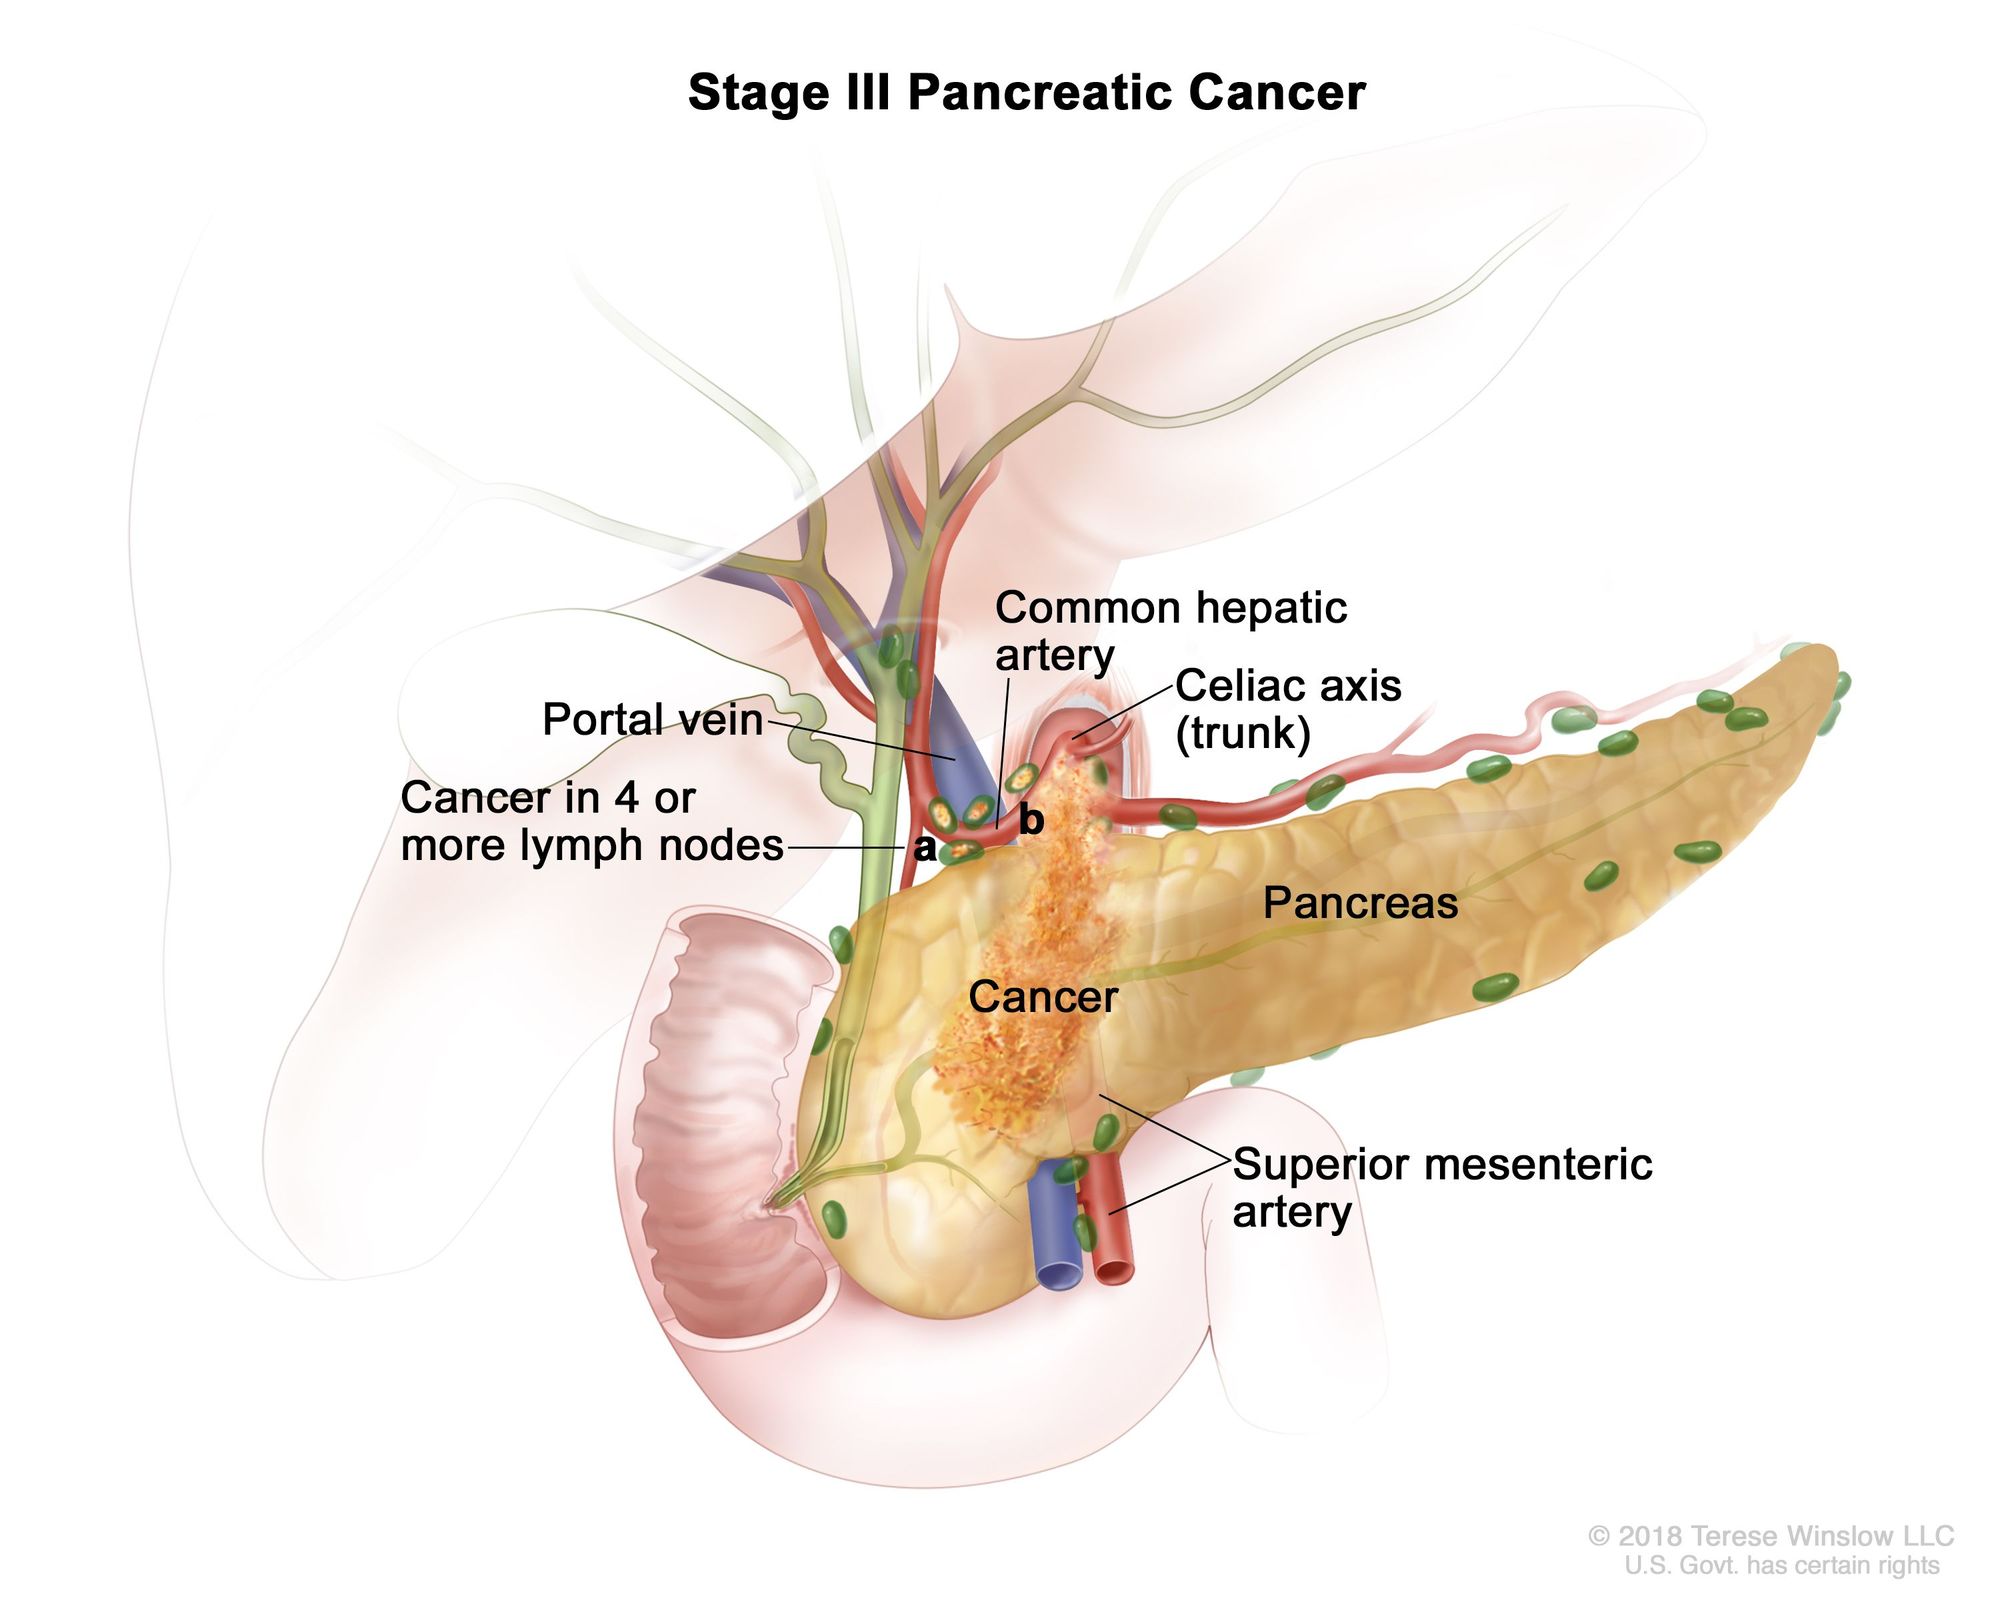 What is Stage 3 Pancreatic Cancer?